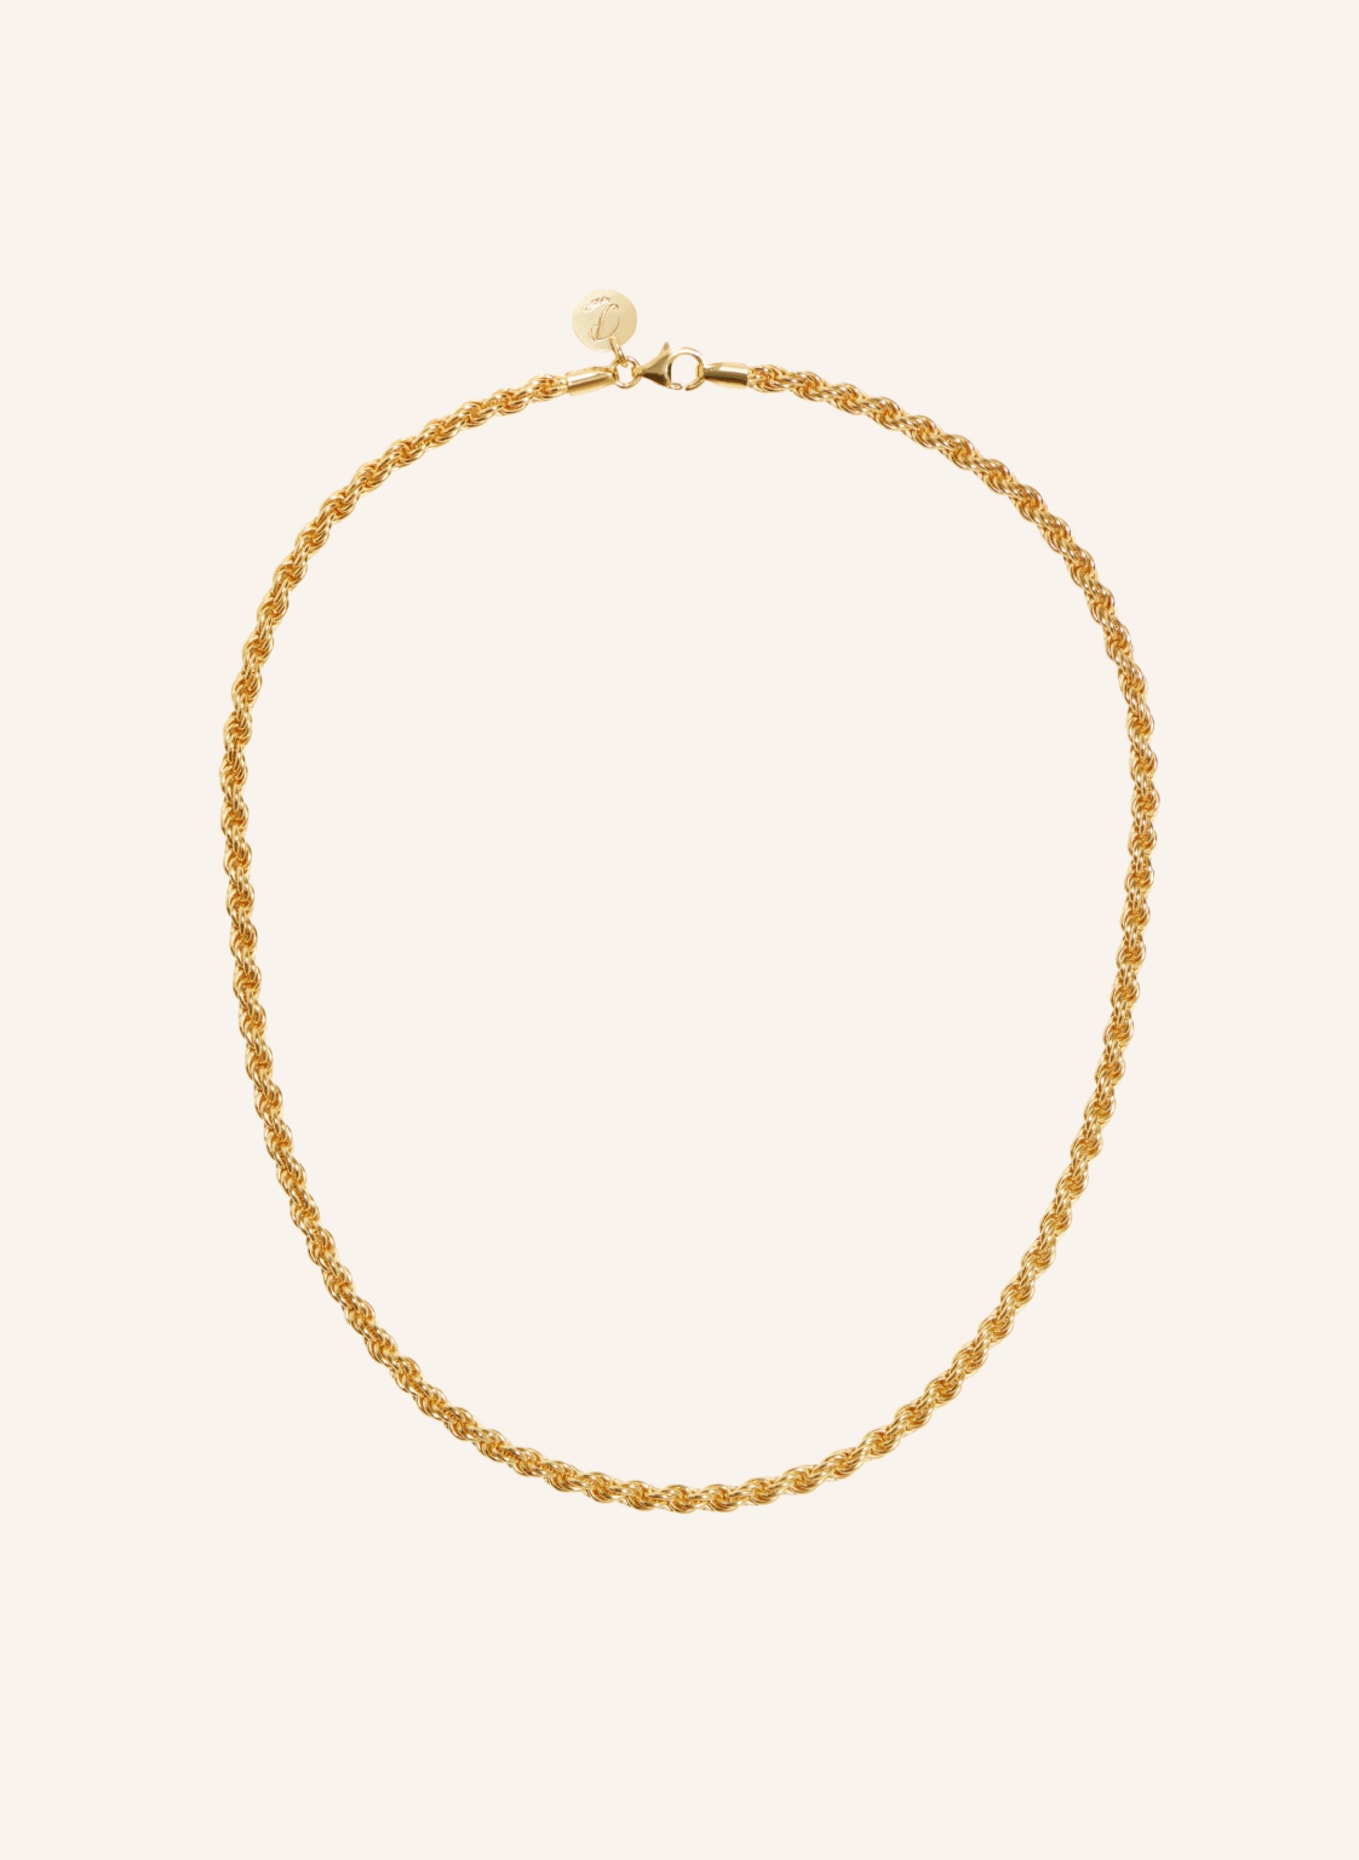 Pompidou Kette RUBY BOLD ROPE CHAIN by GLAMBOU, Farbe: GOLD (Bild 1)